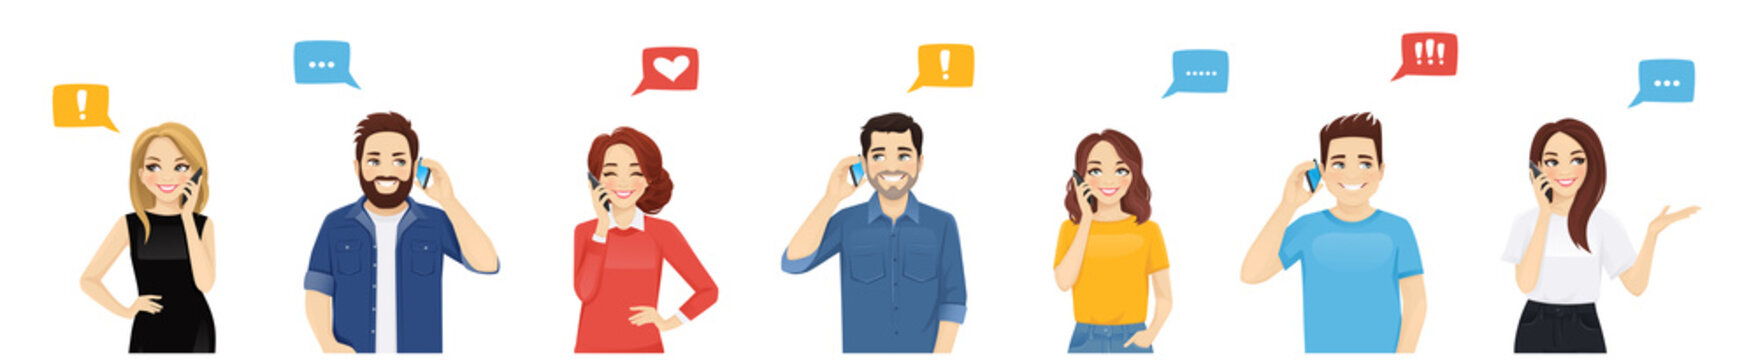 Smiling young people talking on mobile phones. Men and women characters set vector illustration isolated